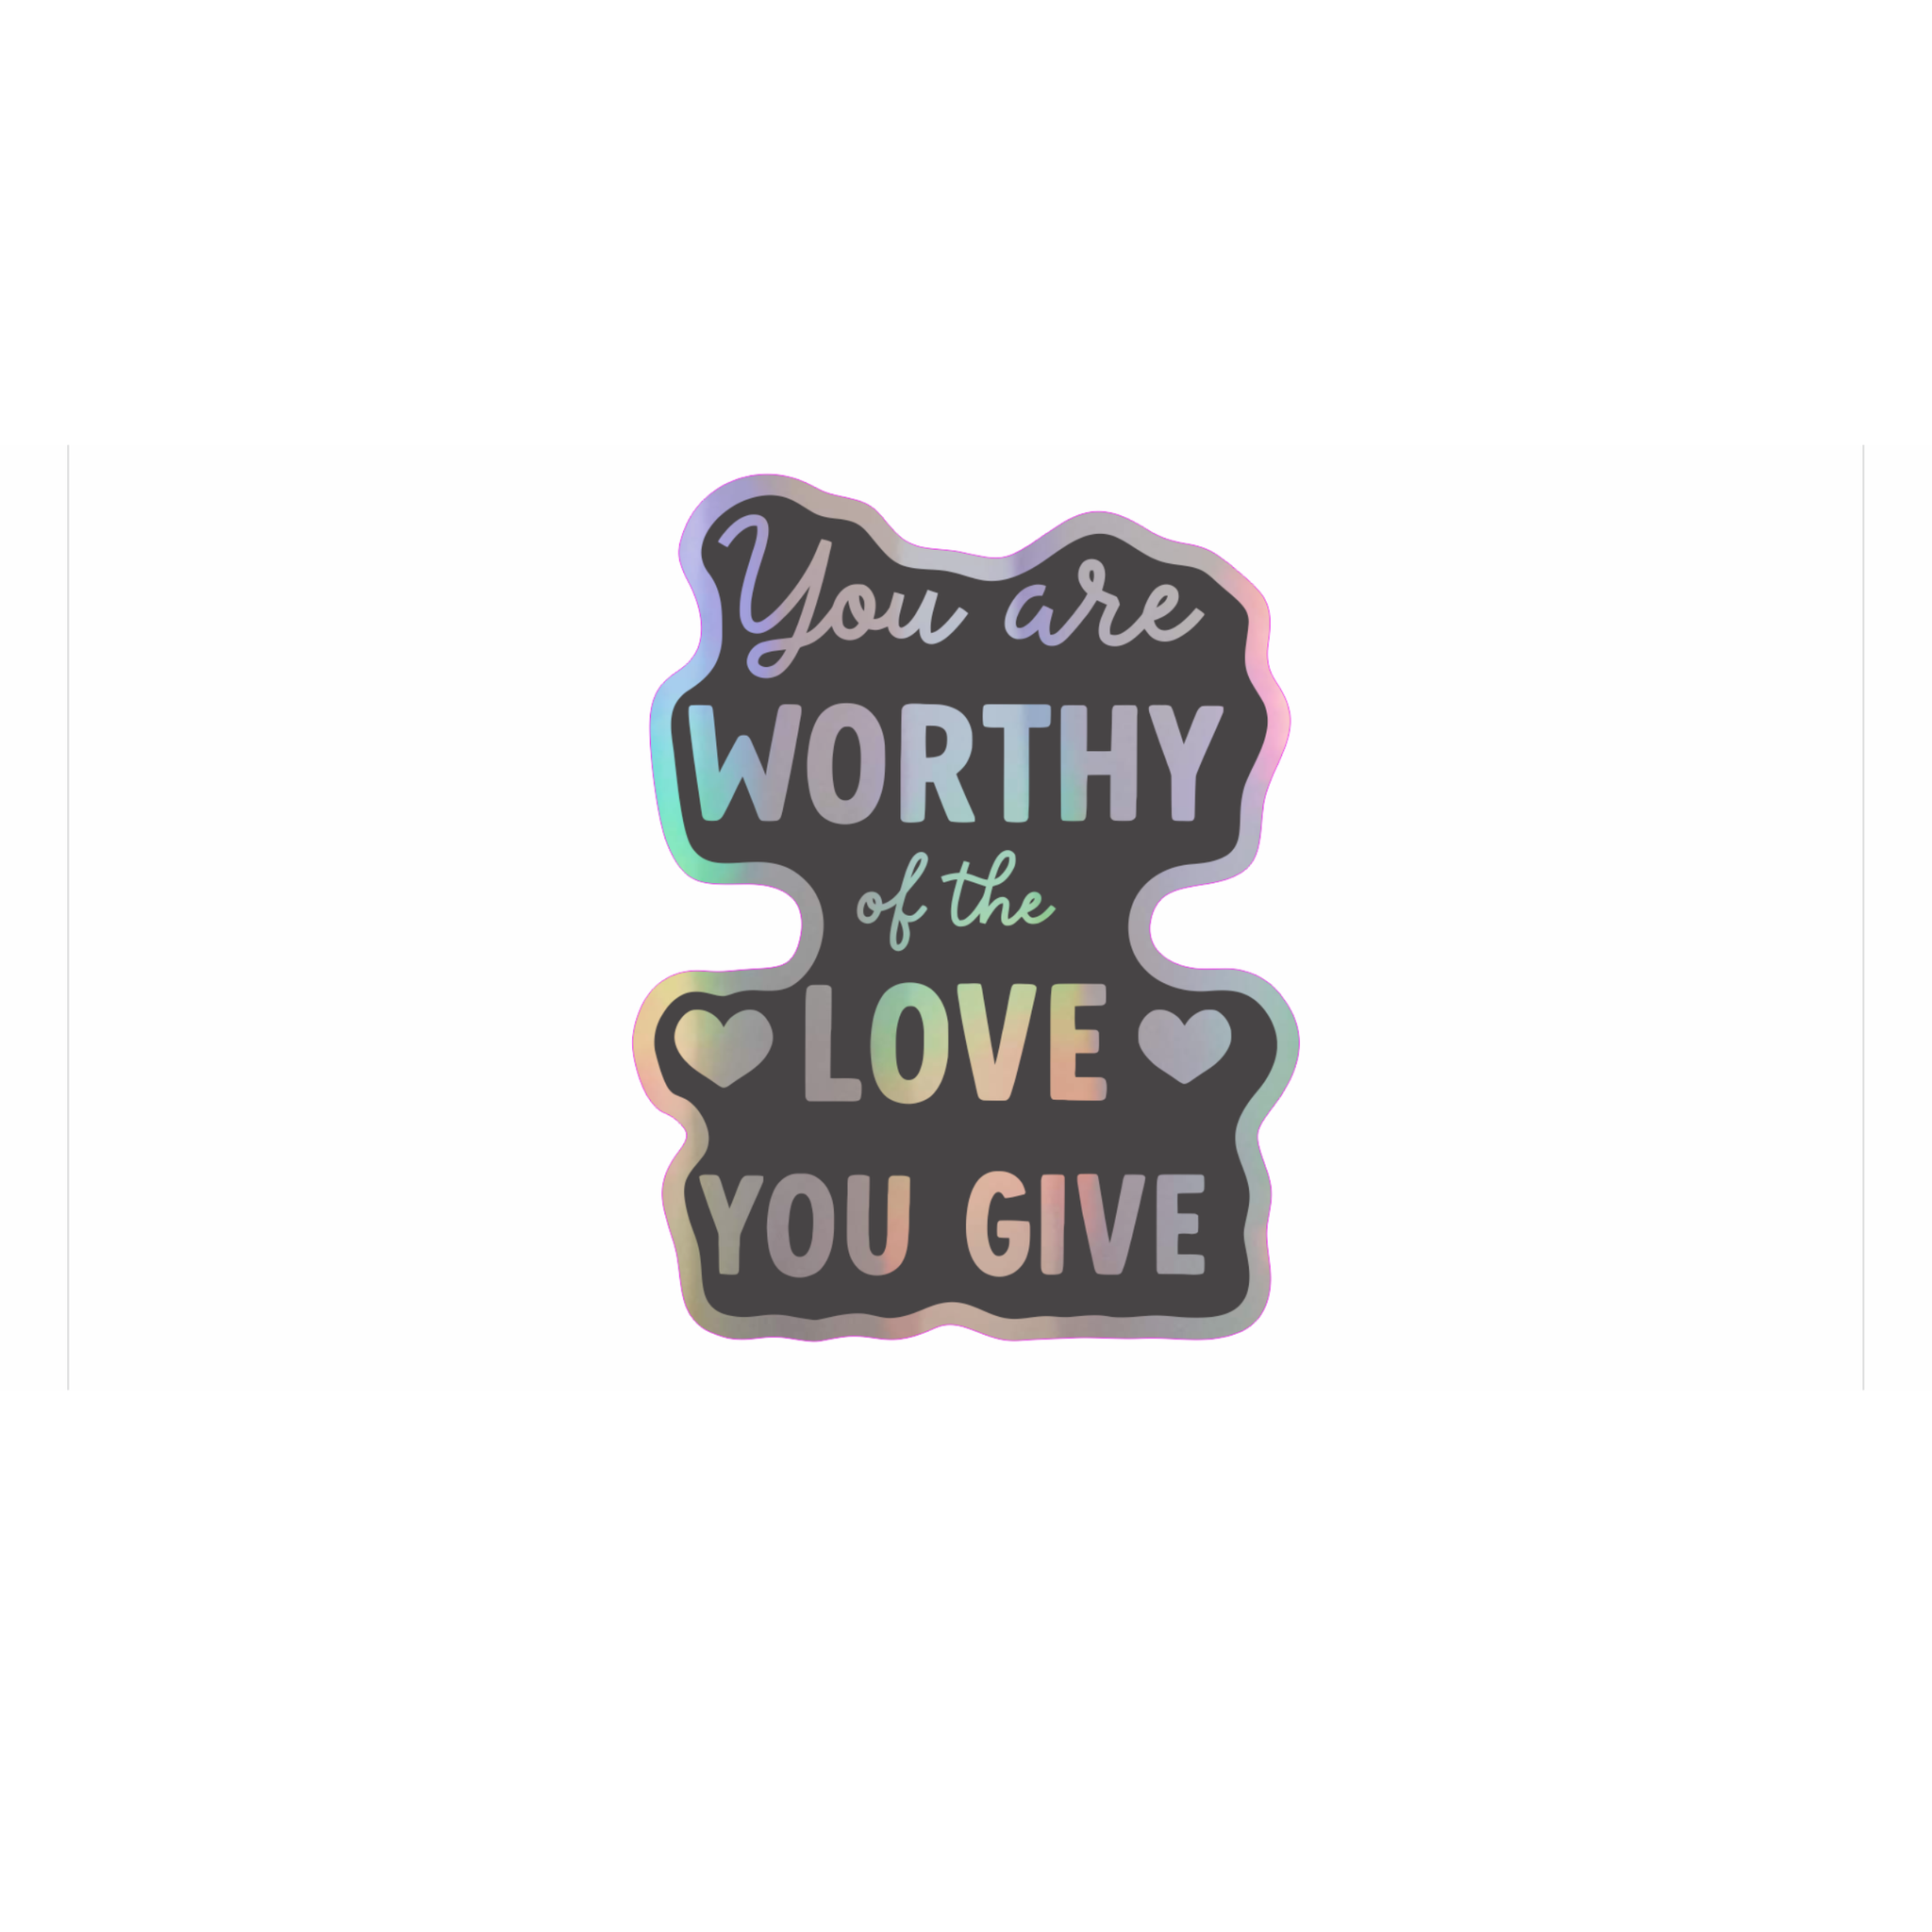 Worthy of the love you give   holographic vinyl sticker